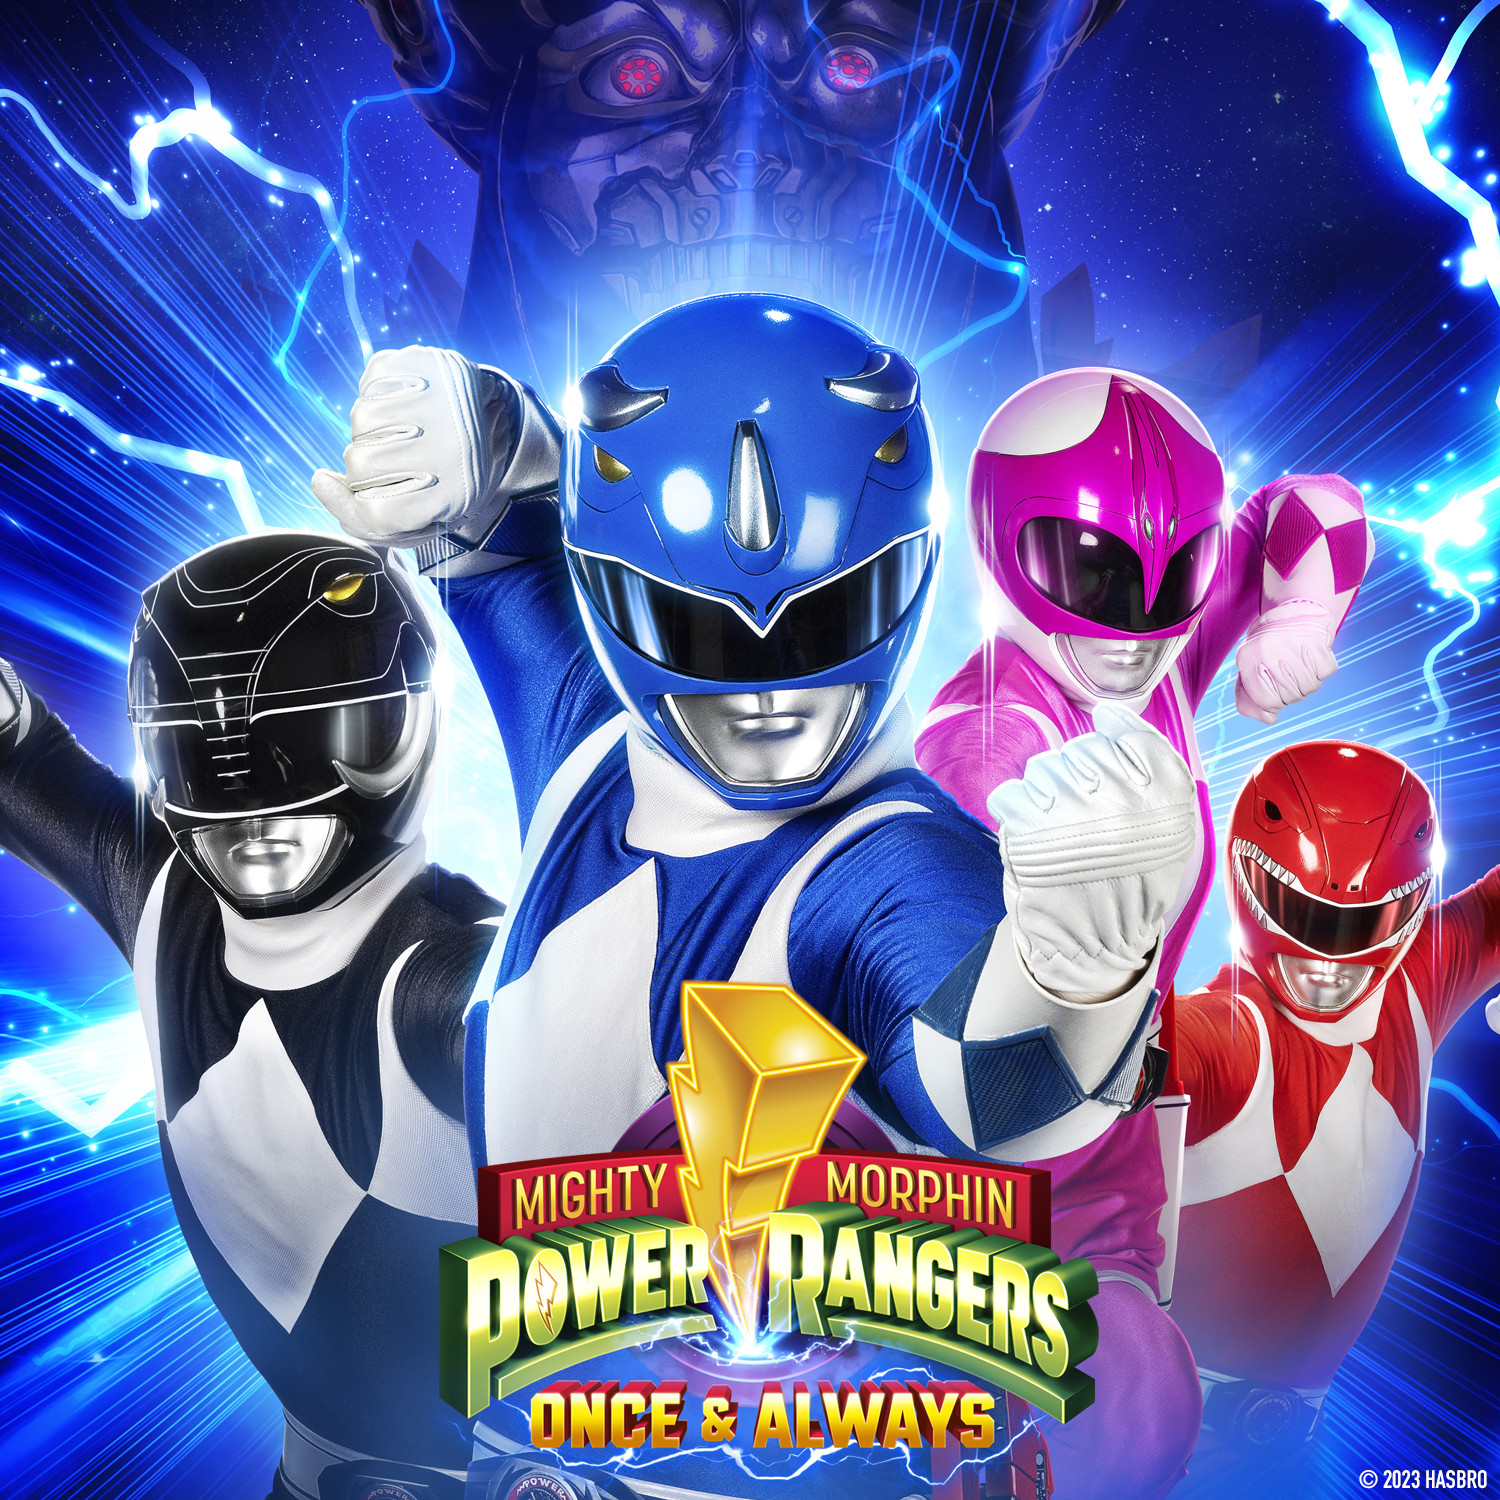 Mighty Morphin Power Rangers: Once & Always Trailer Released!